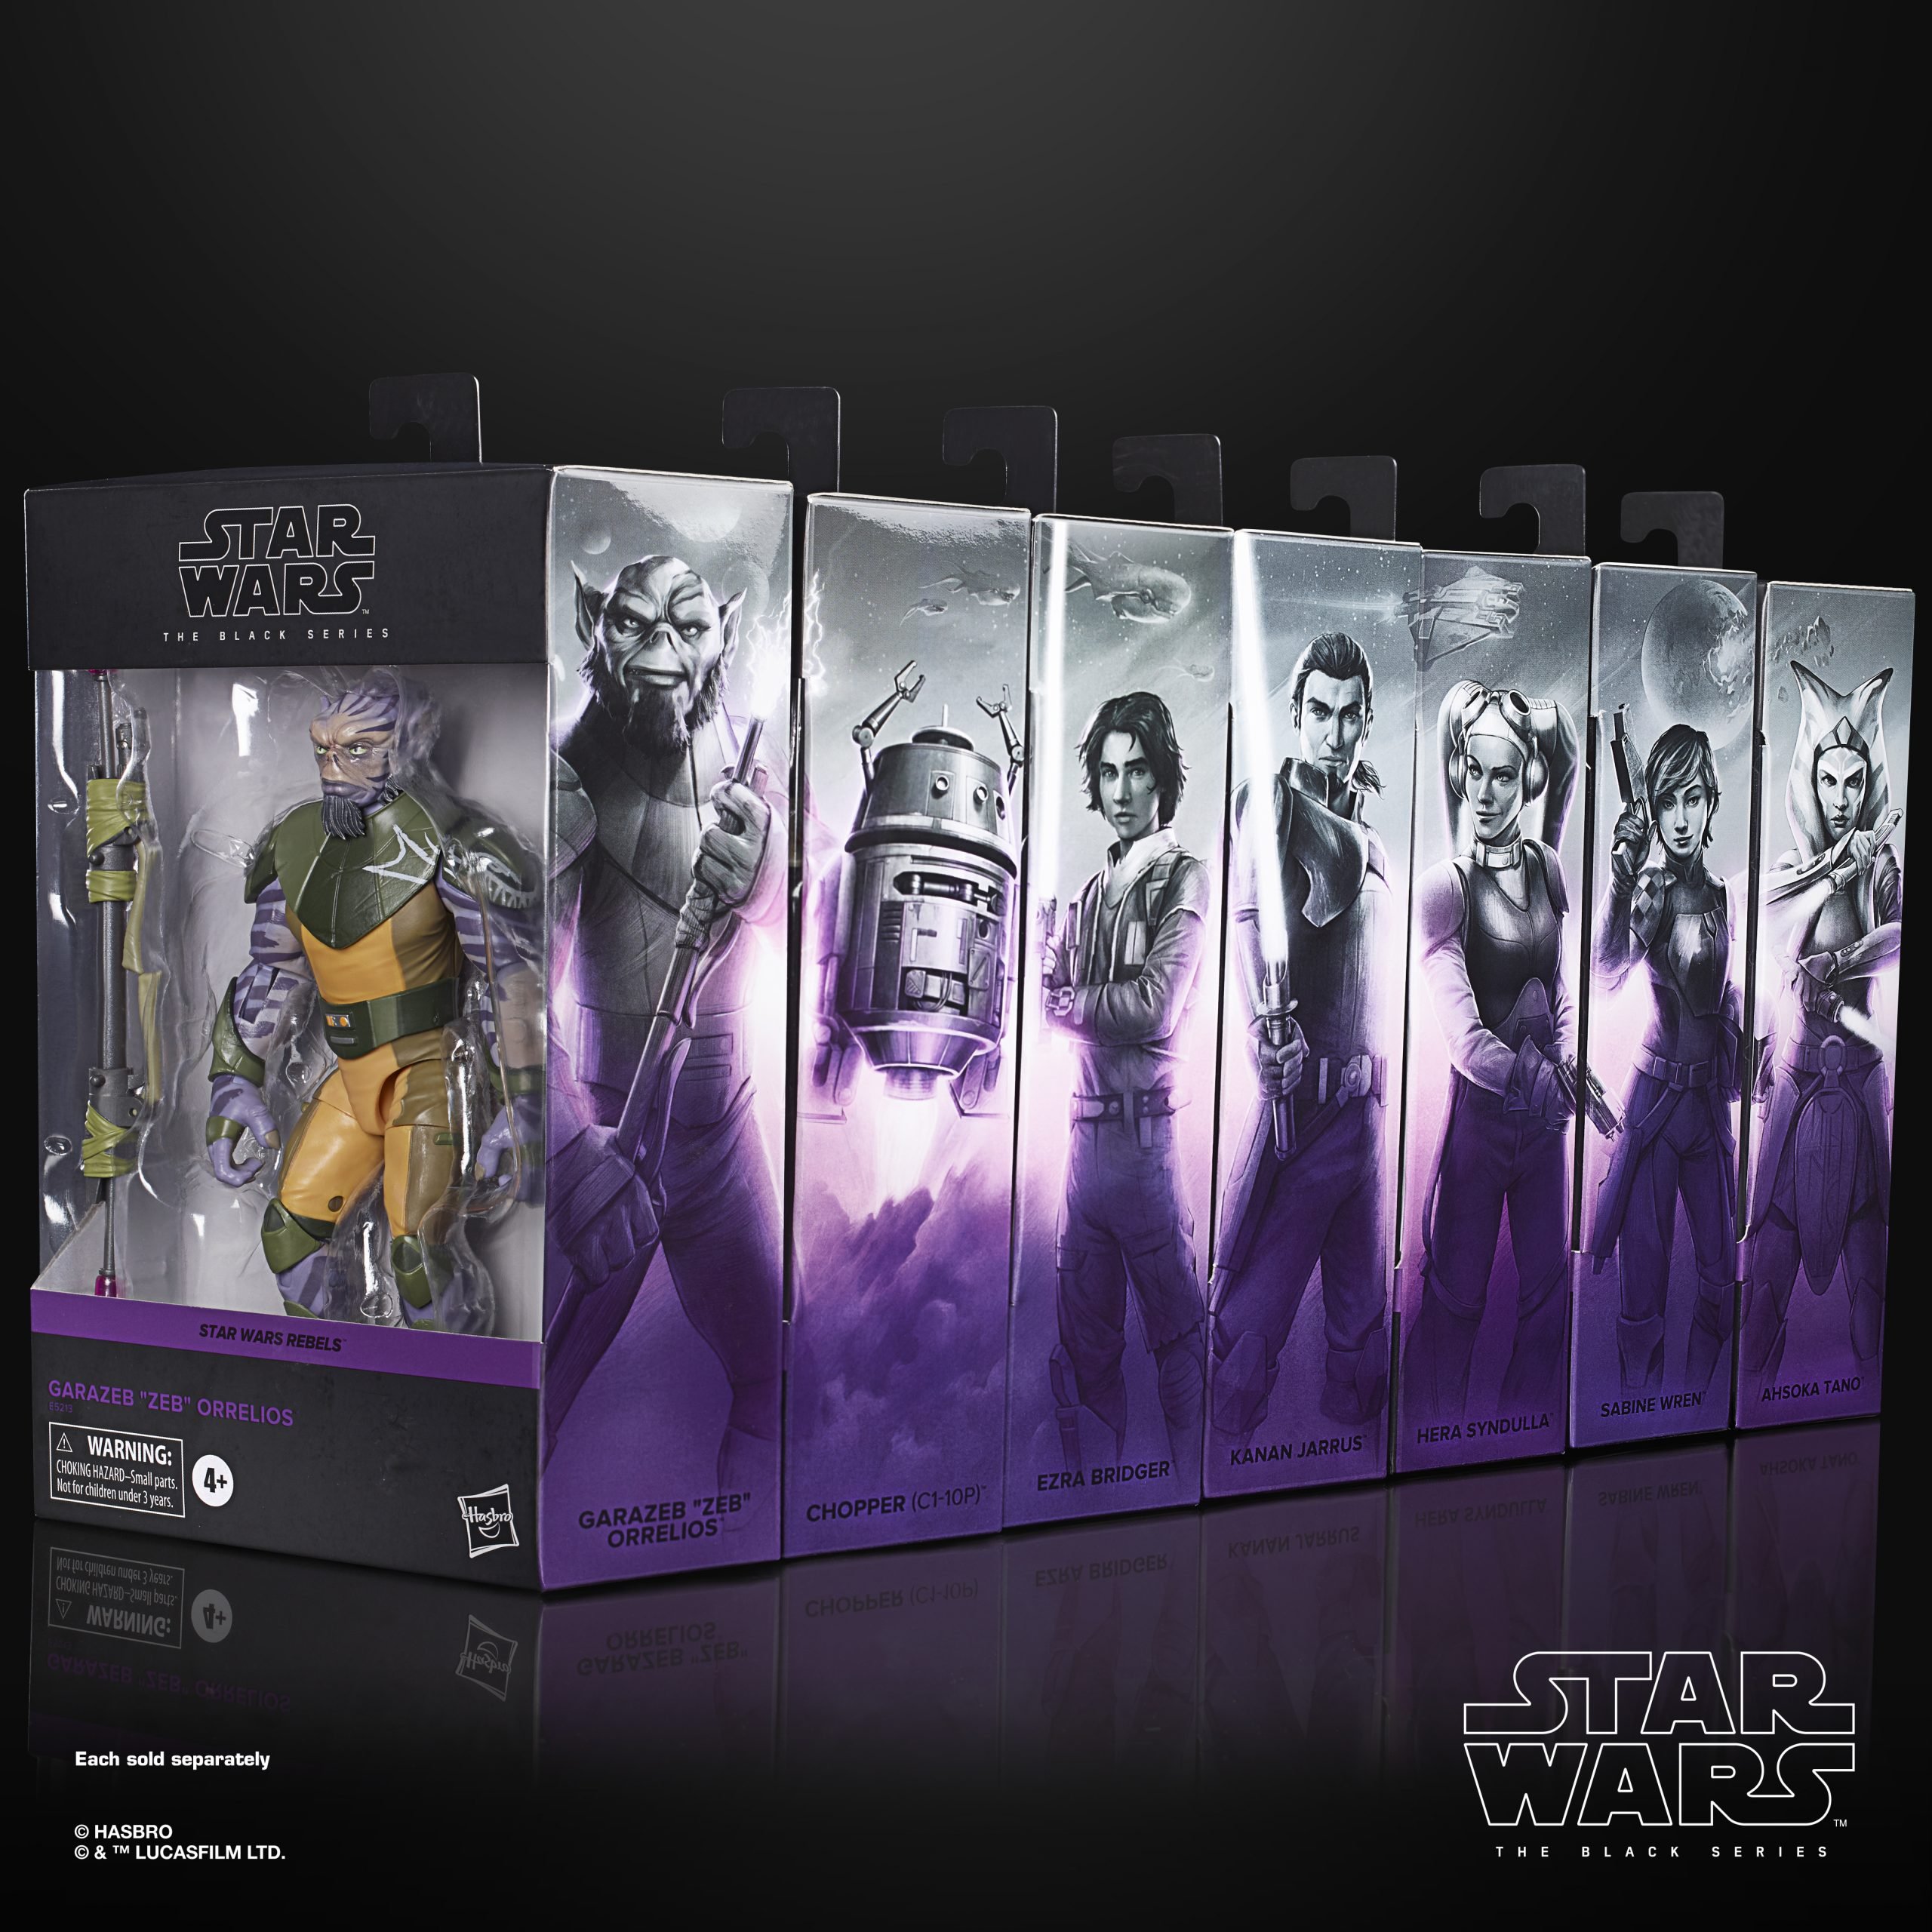 Hasbro Reveals New Packaging for Star Wars The Black Series Star